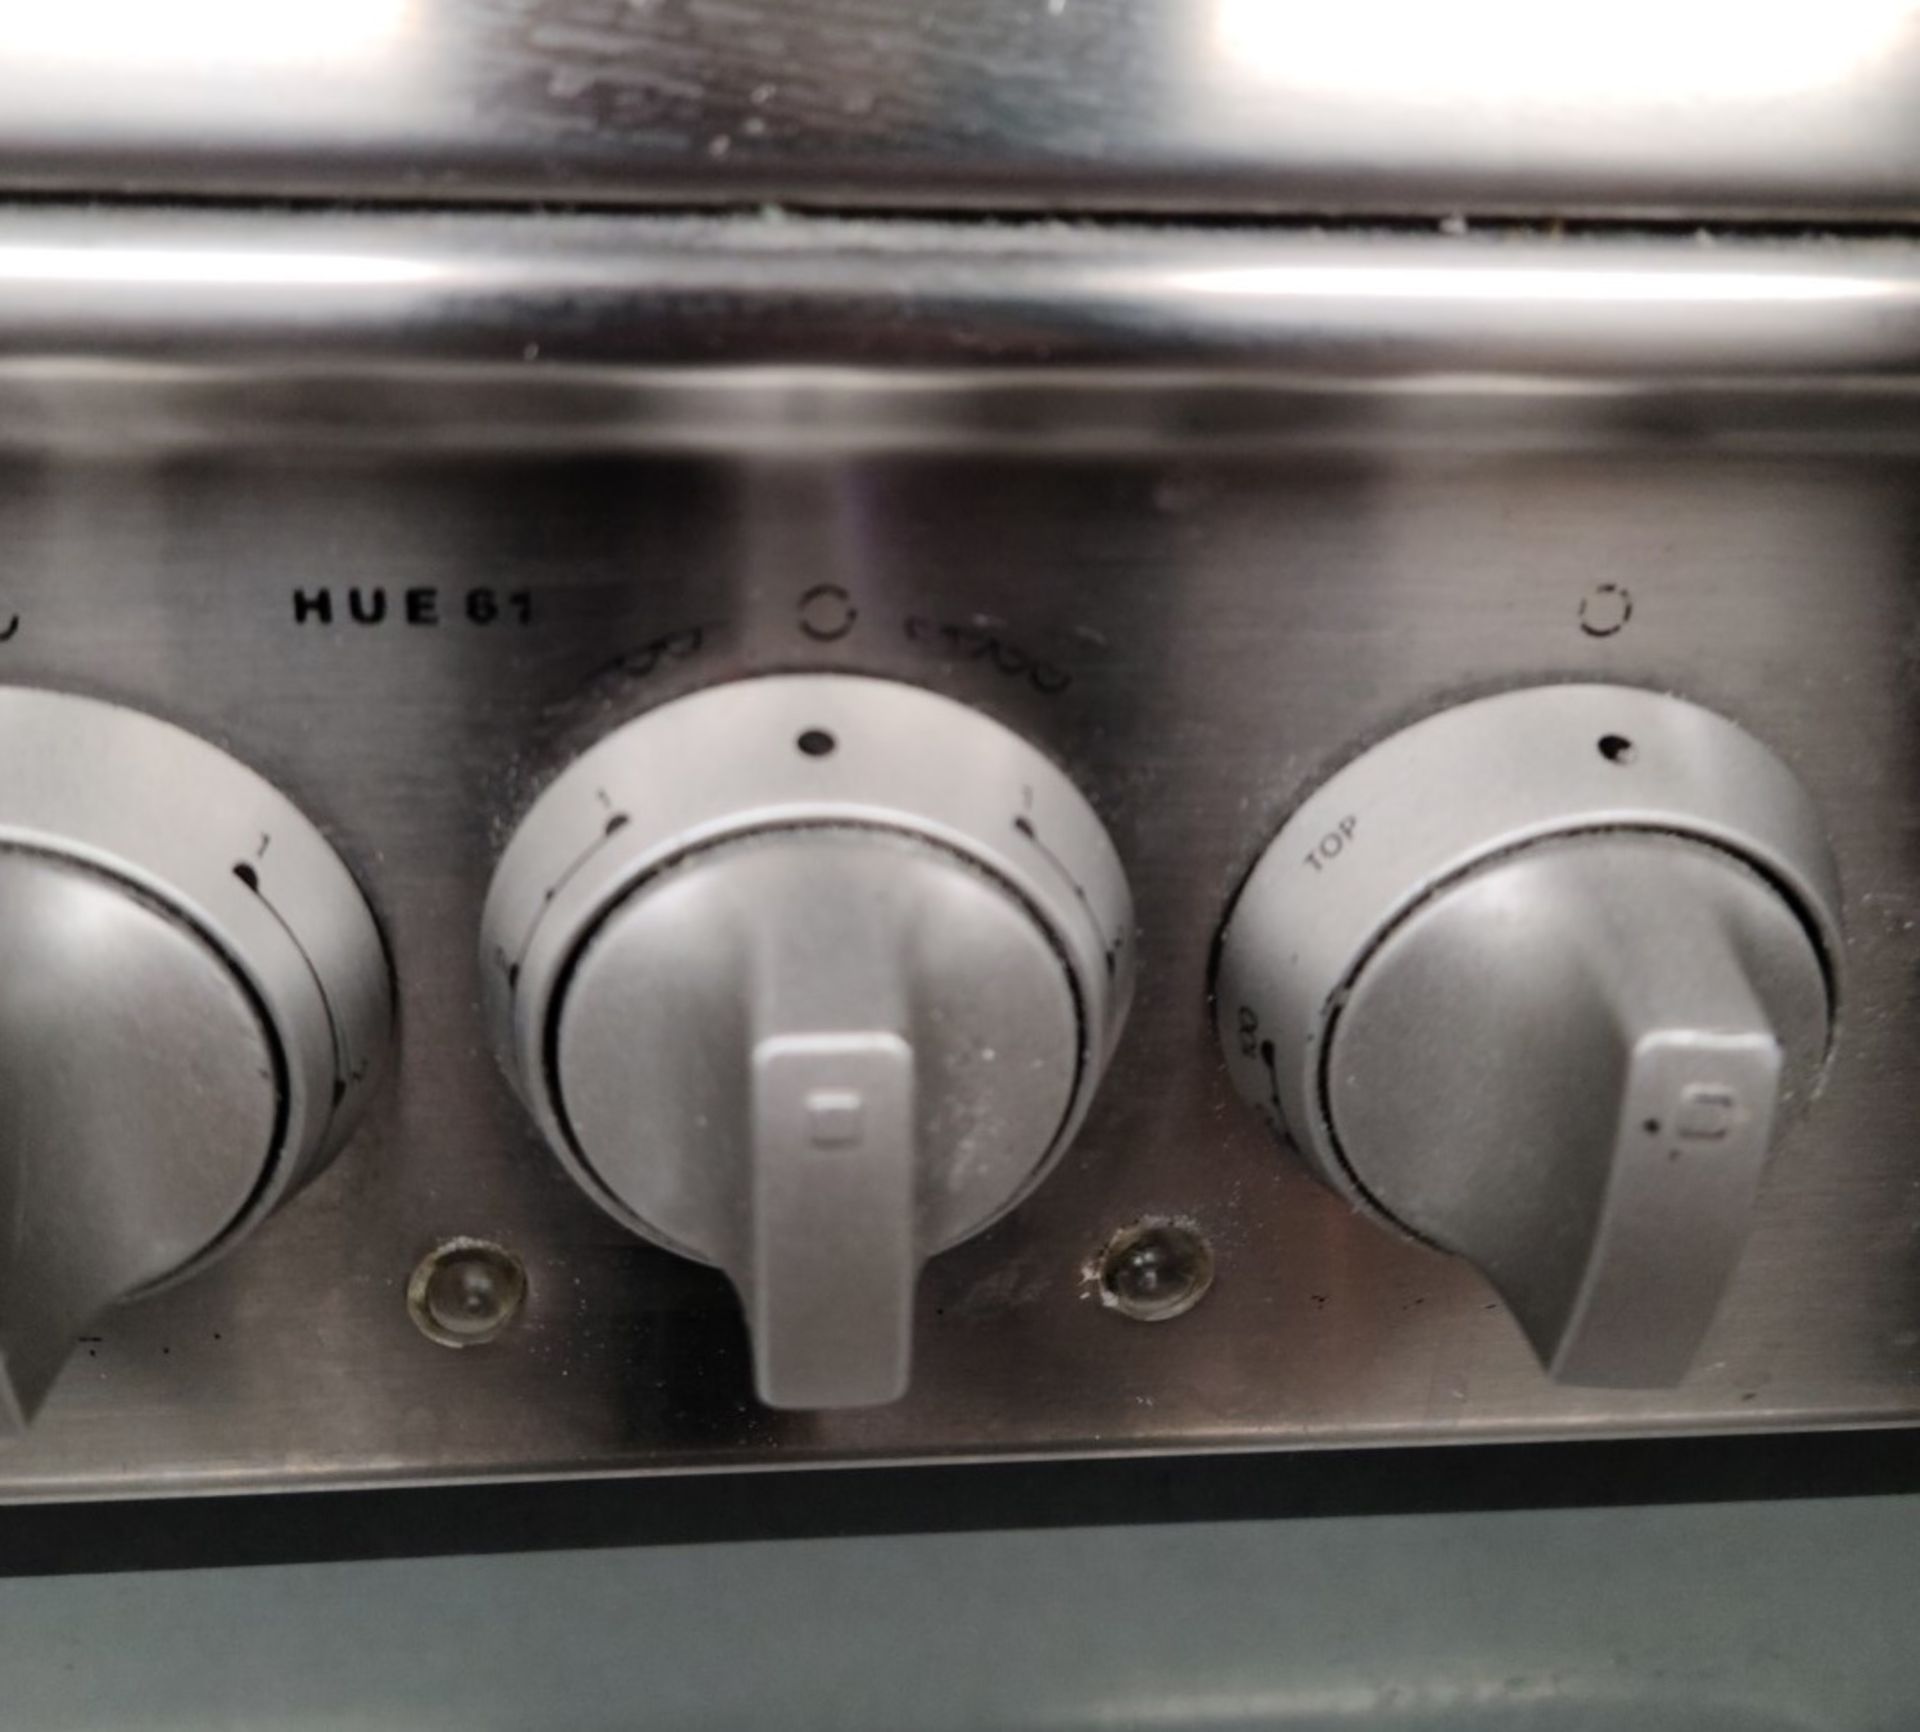 1 x Hotpoint HUI611X Electric Cooker With Double Oven, Four Burner Hob and Stainless Steel Finish - Image 5 of 9